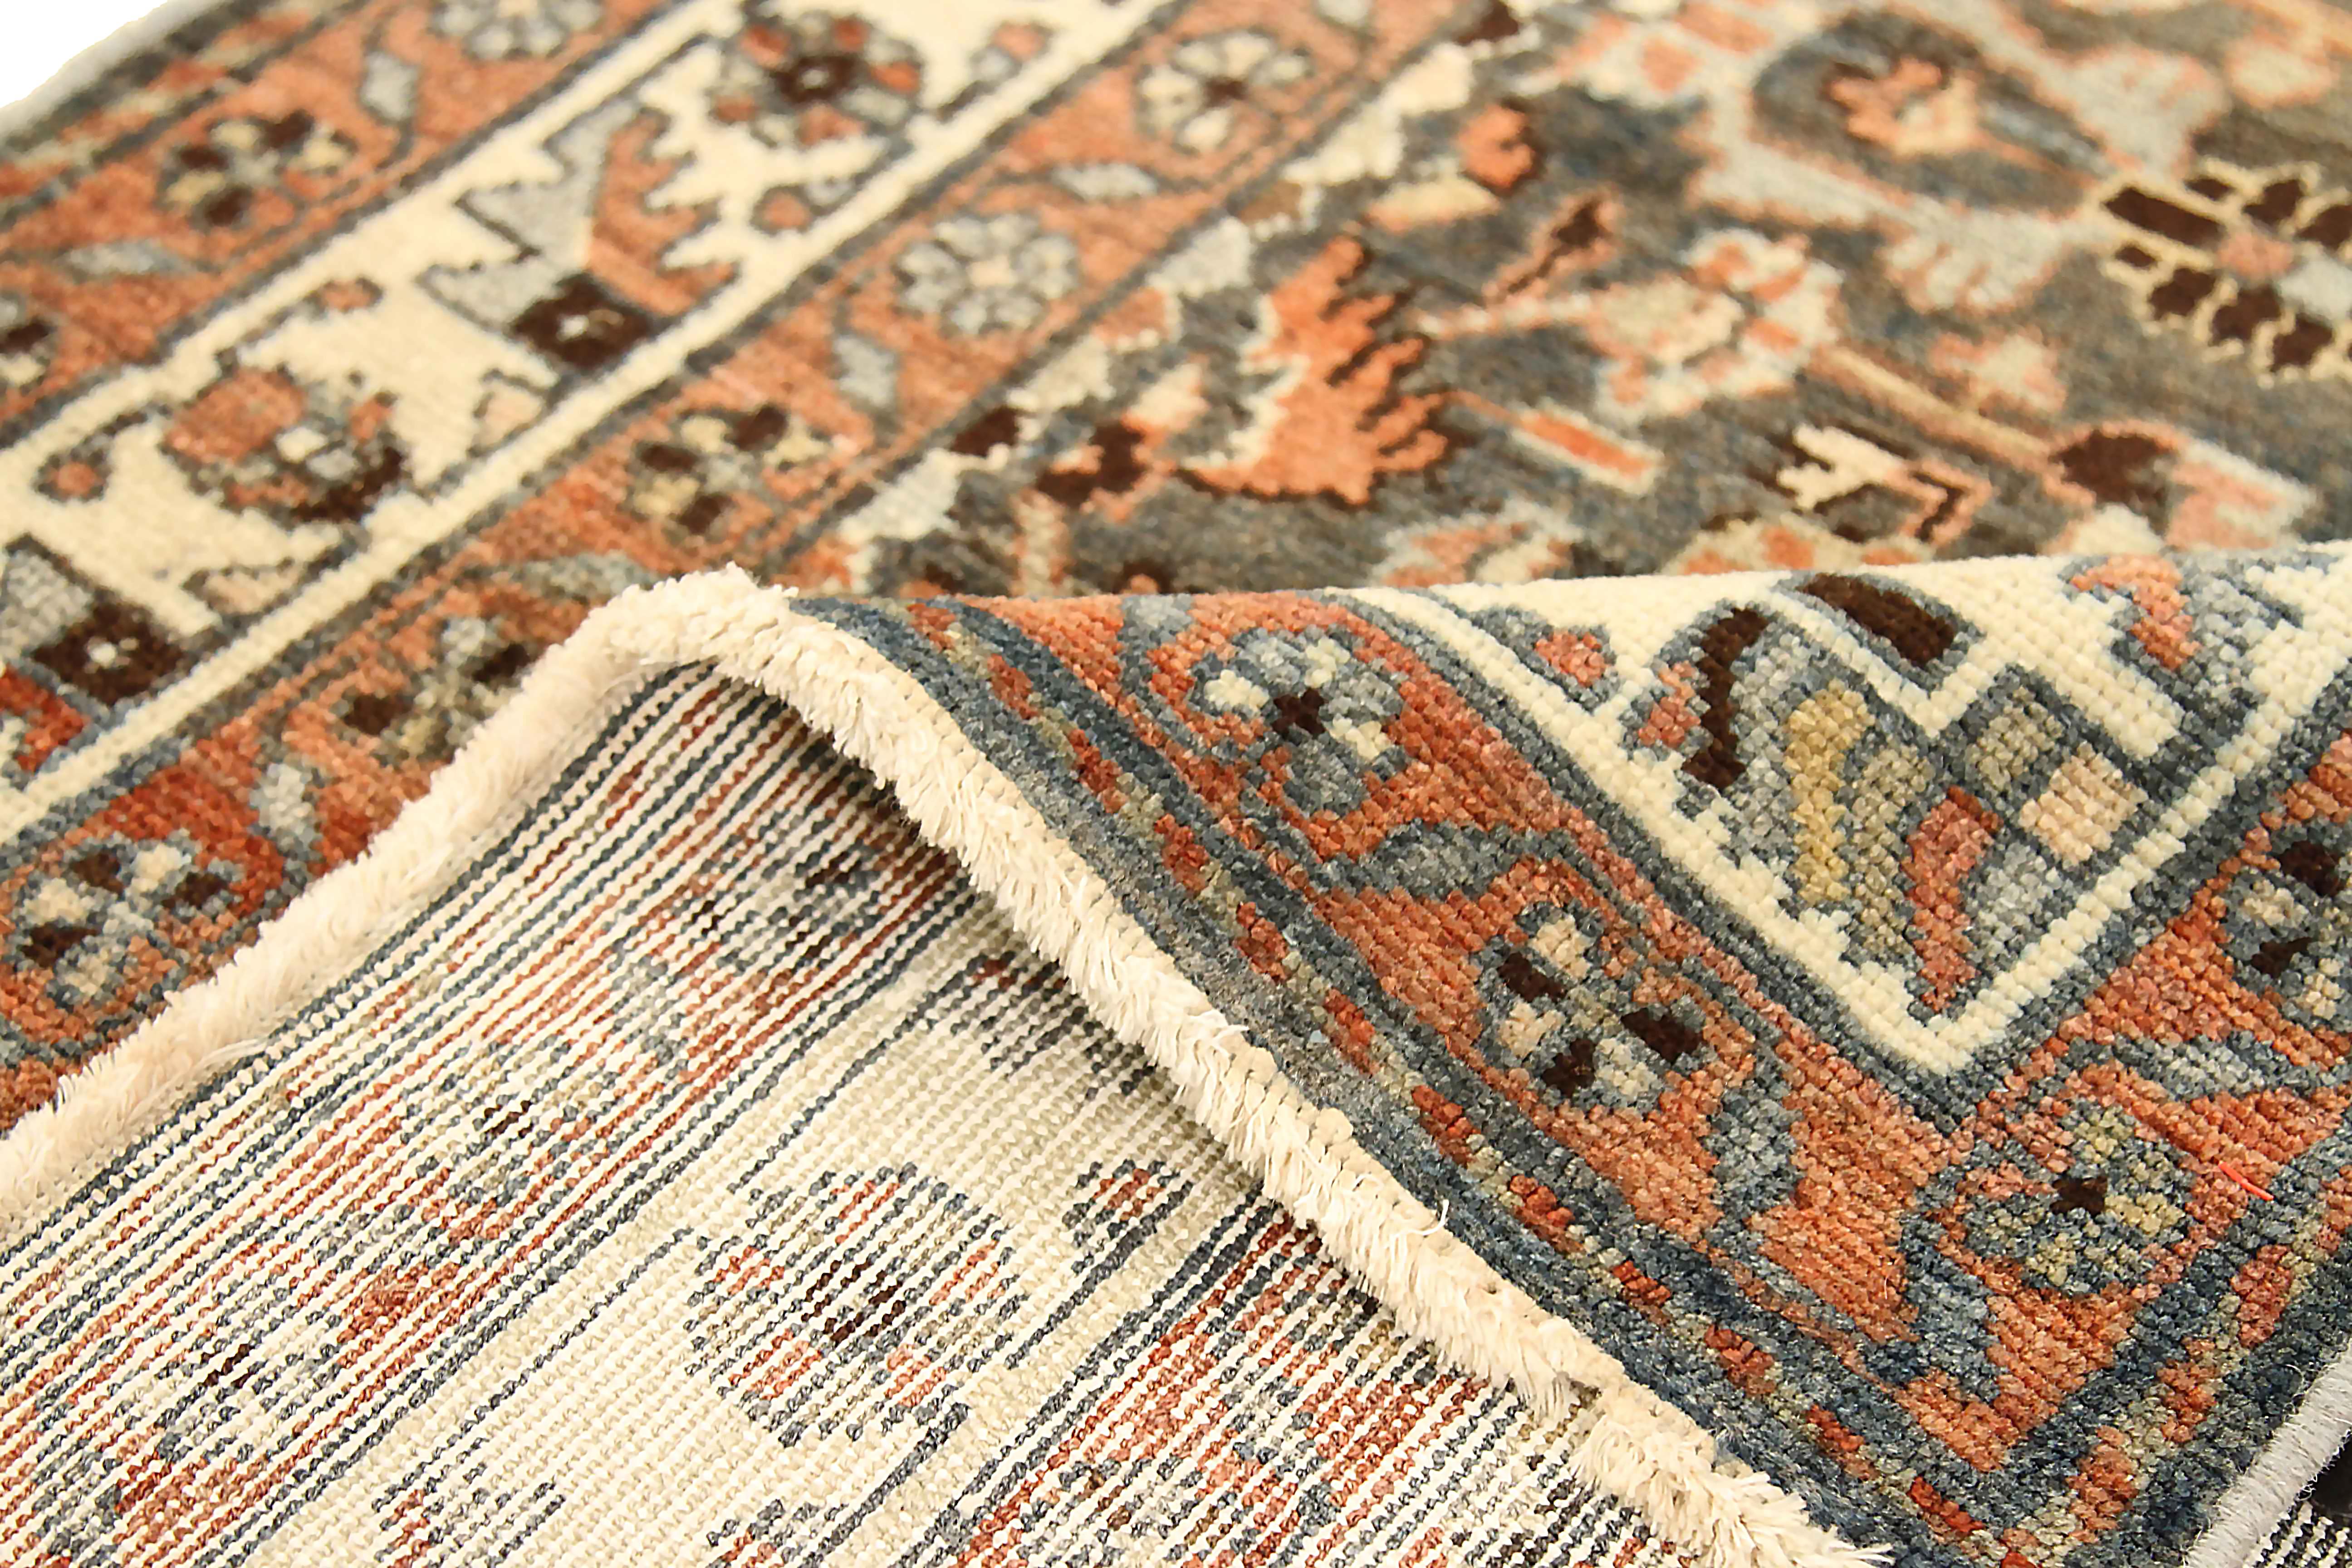 Antique Persian Malayer Runner Rug with Botanical & Tribal Design In Excellent Condition For Sale In Dallas, TX